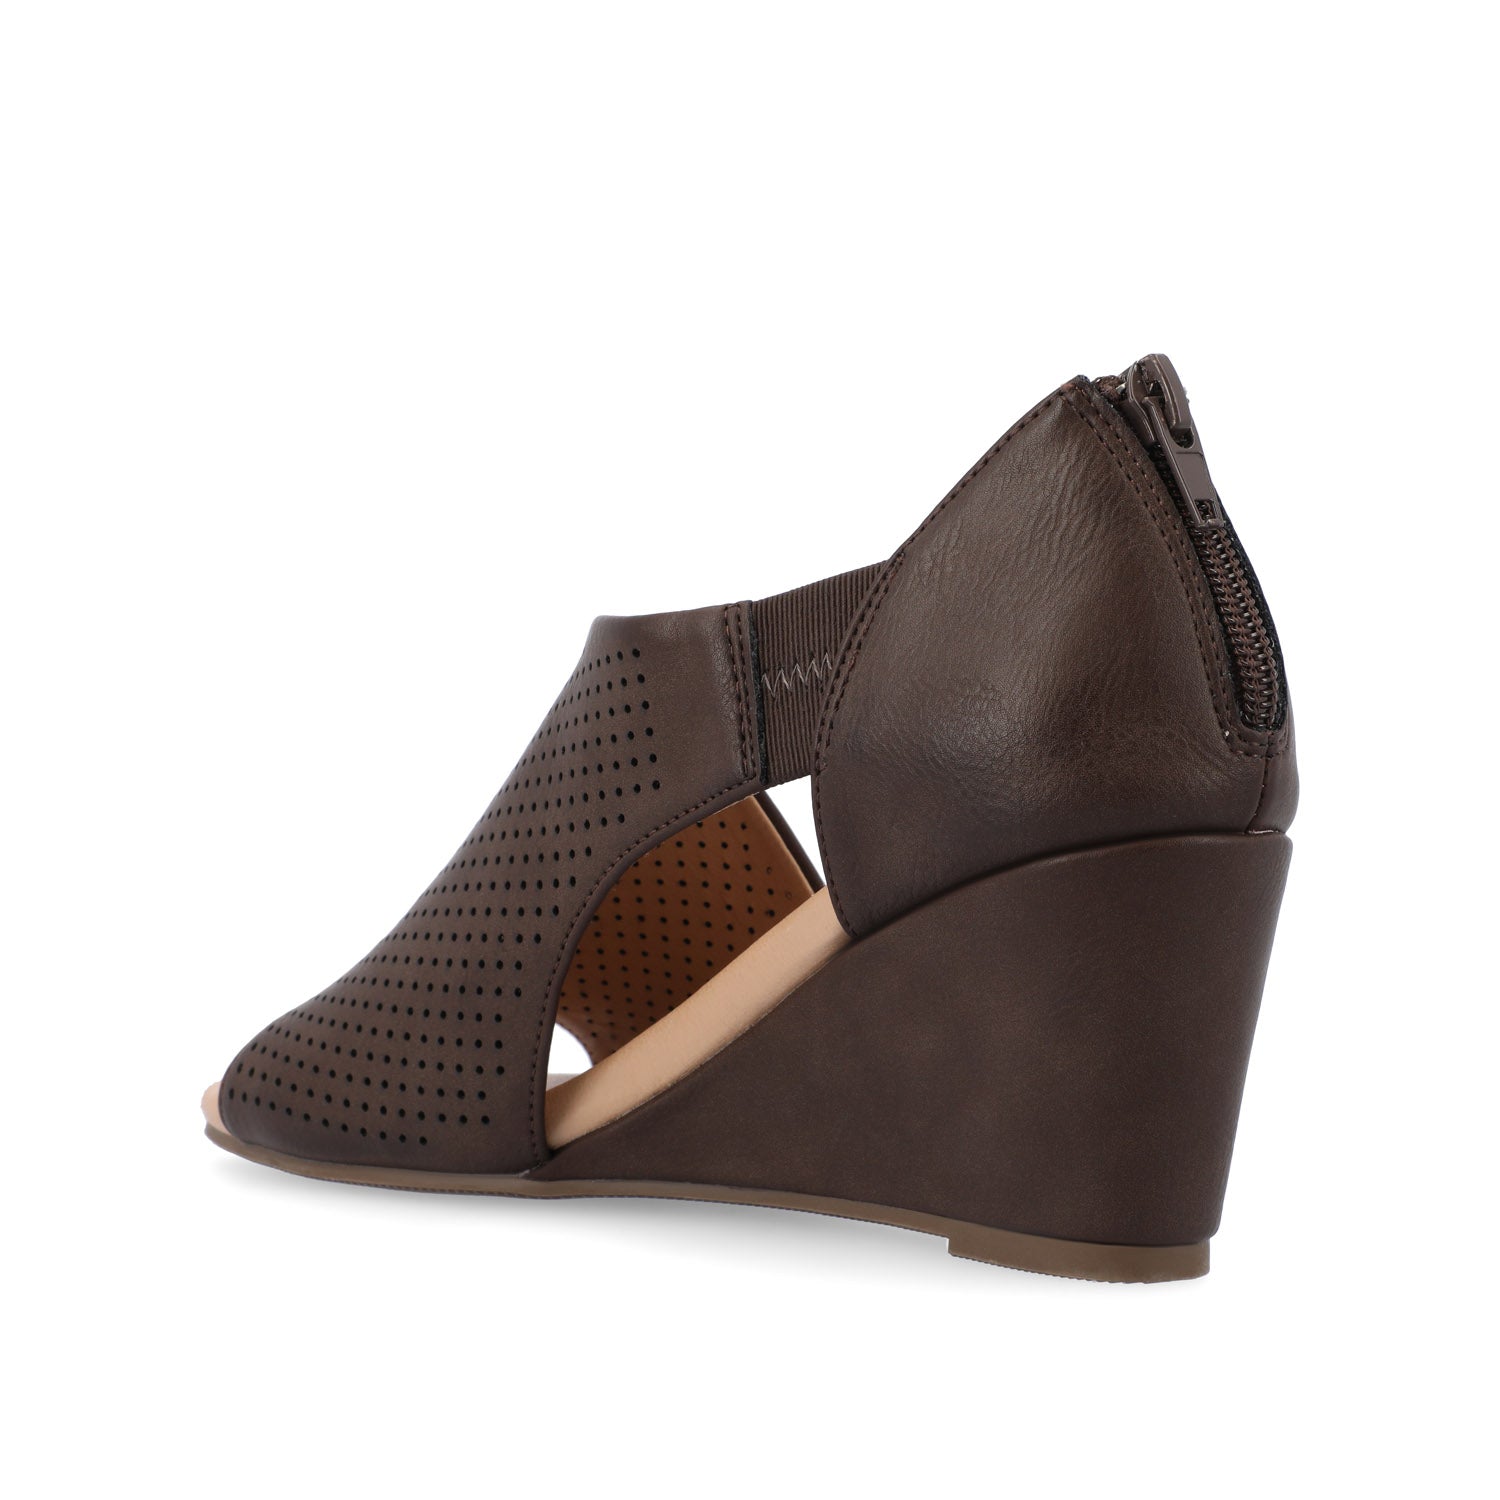 ARETHA WEDGE HEEL SANDALS IN FAUX LEATHER